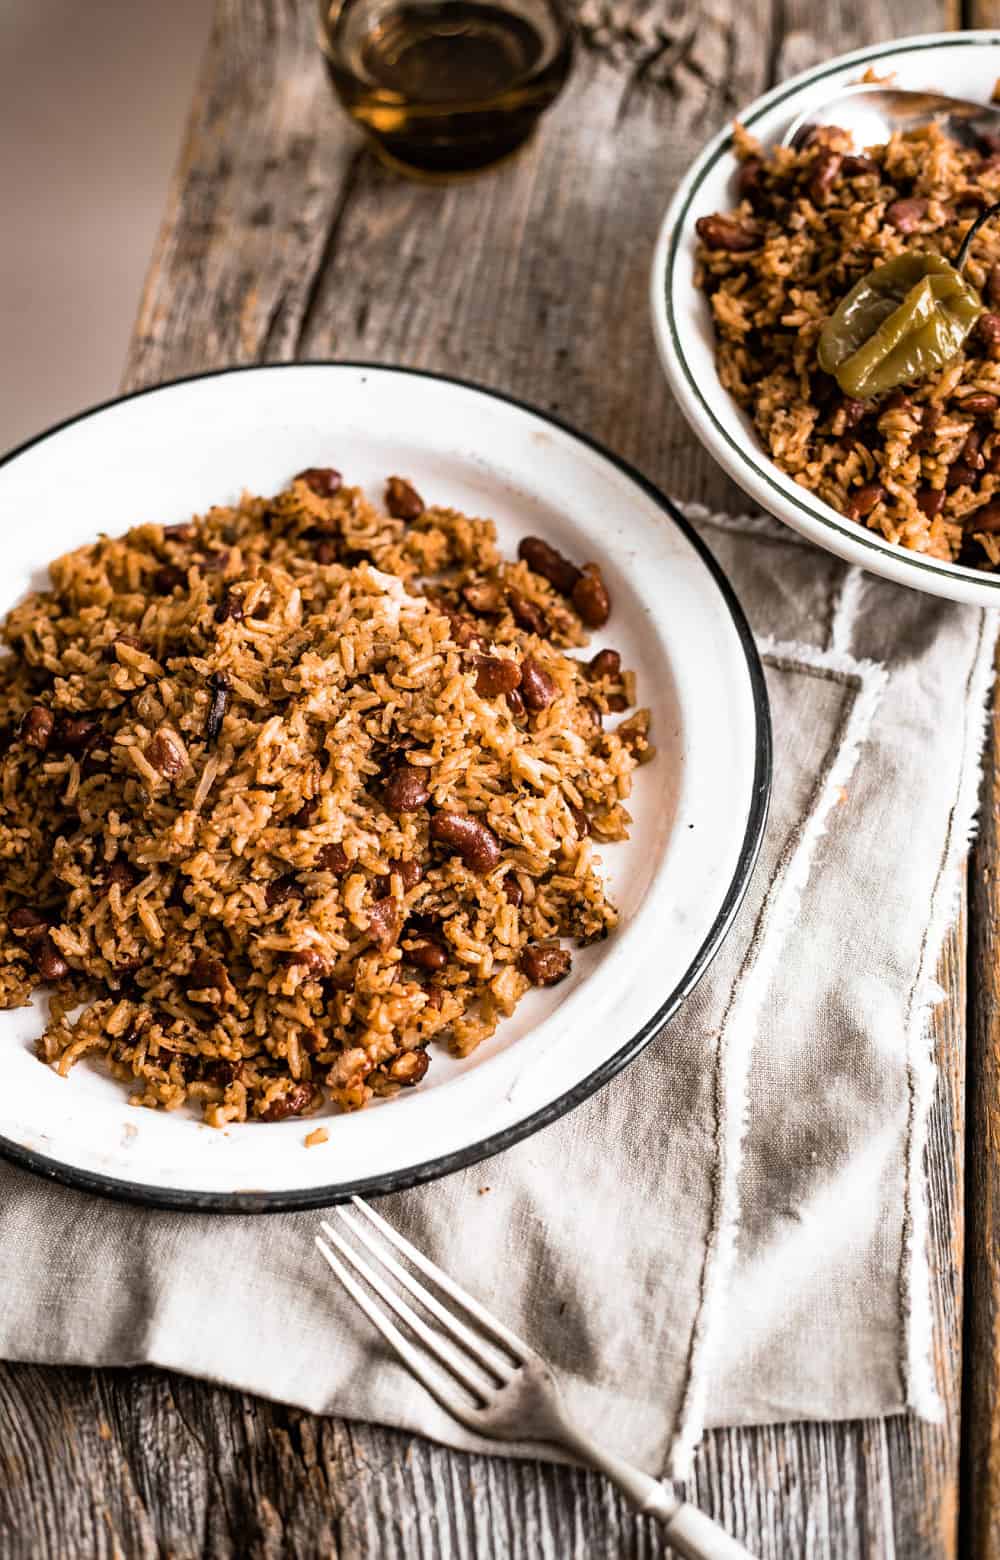 Two plates of Caribbean Rice and Beans on white plates on a wooden board